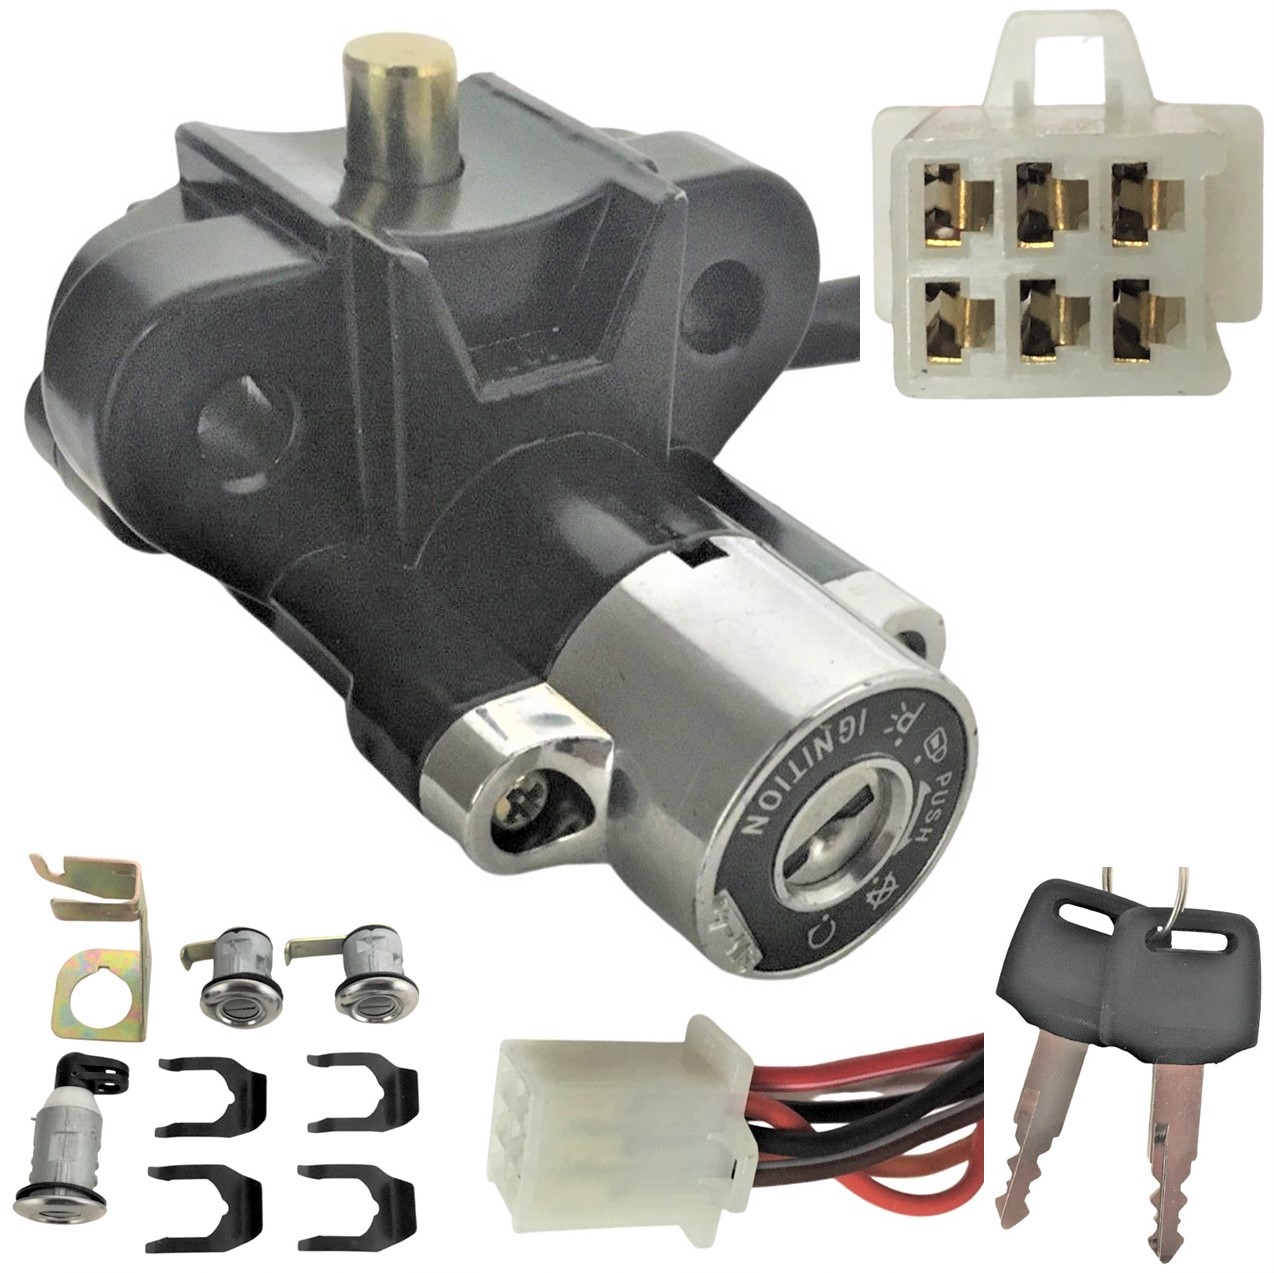 Ignition Switch Fits Many 150-250 Scooters With 3 Locks 6 Pin in 6 Pin Jack Bolts c/c=50mm - Click Image to Close